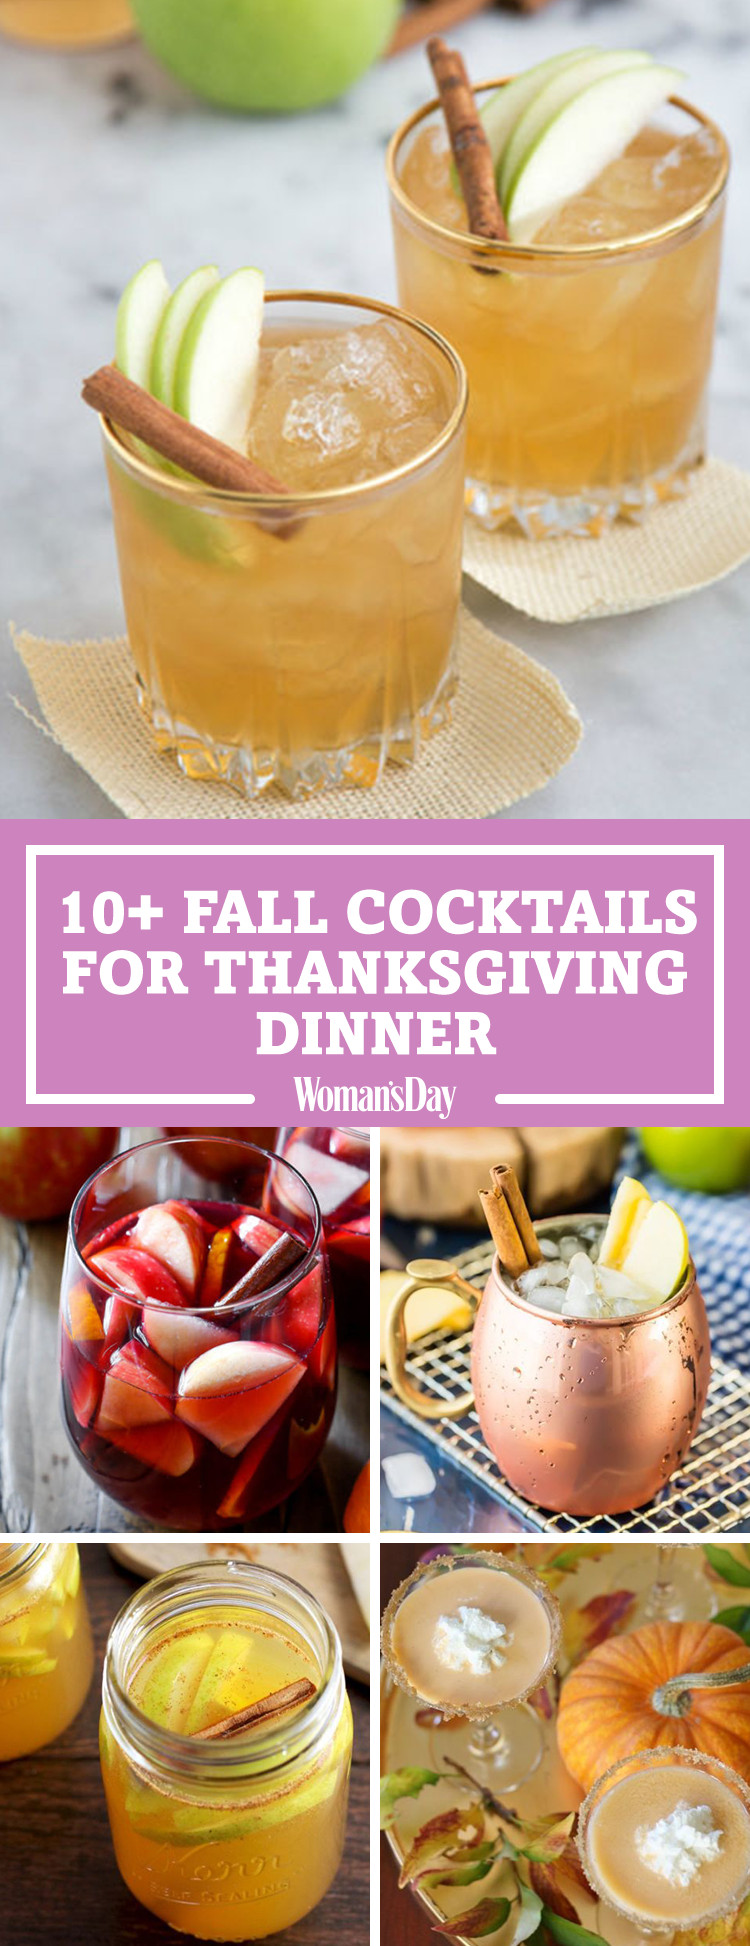 Best Thanksgiving Drinks
 14 Best Fall Cocktails for Thanksgiving Recipes for Easy